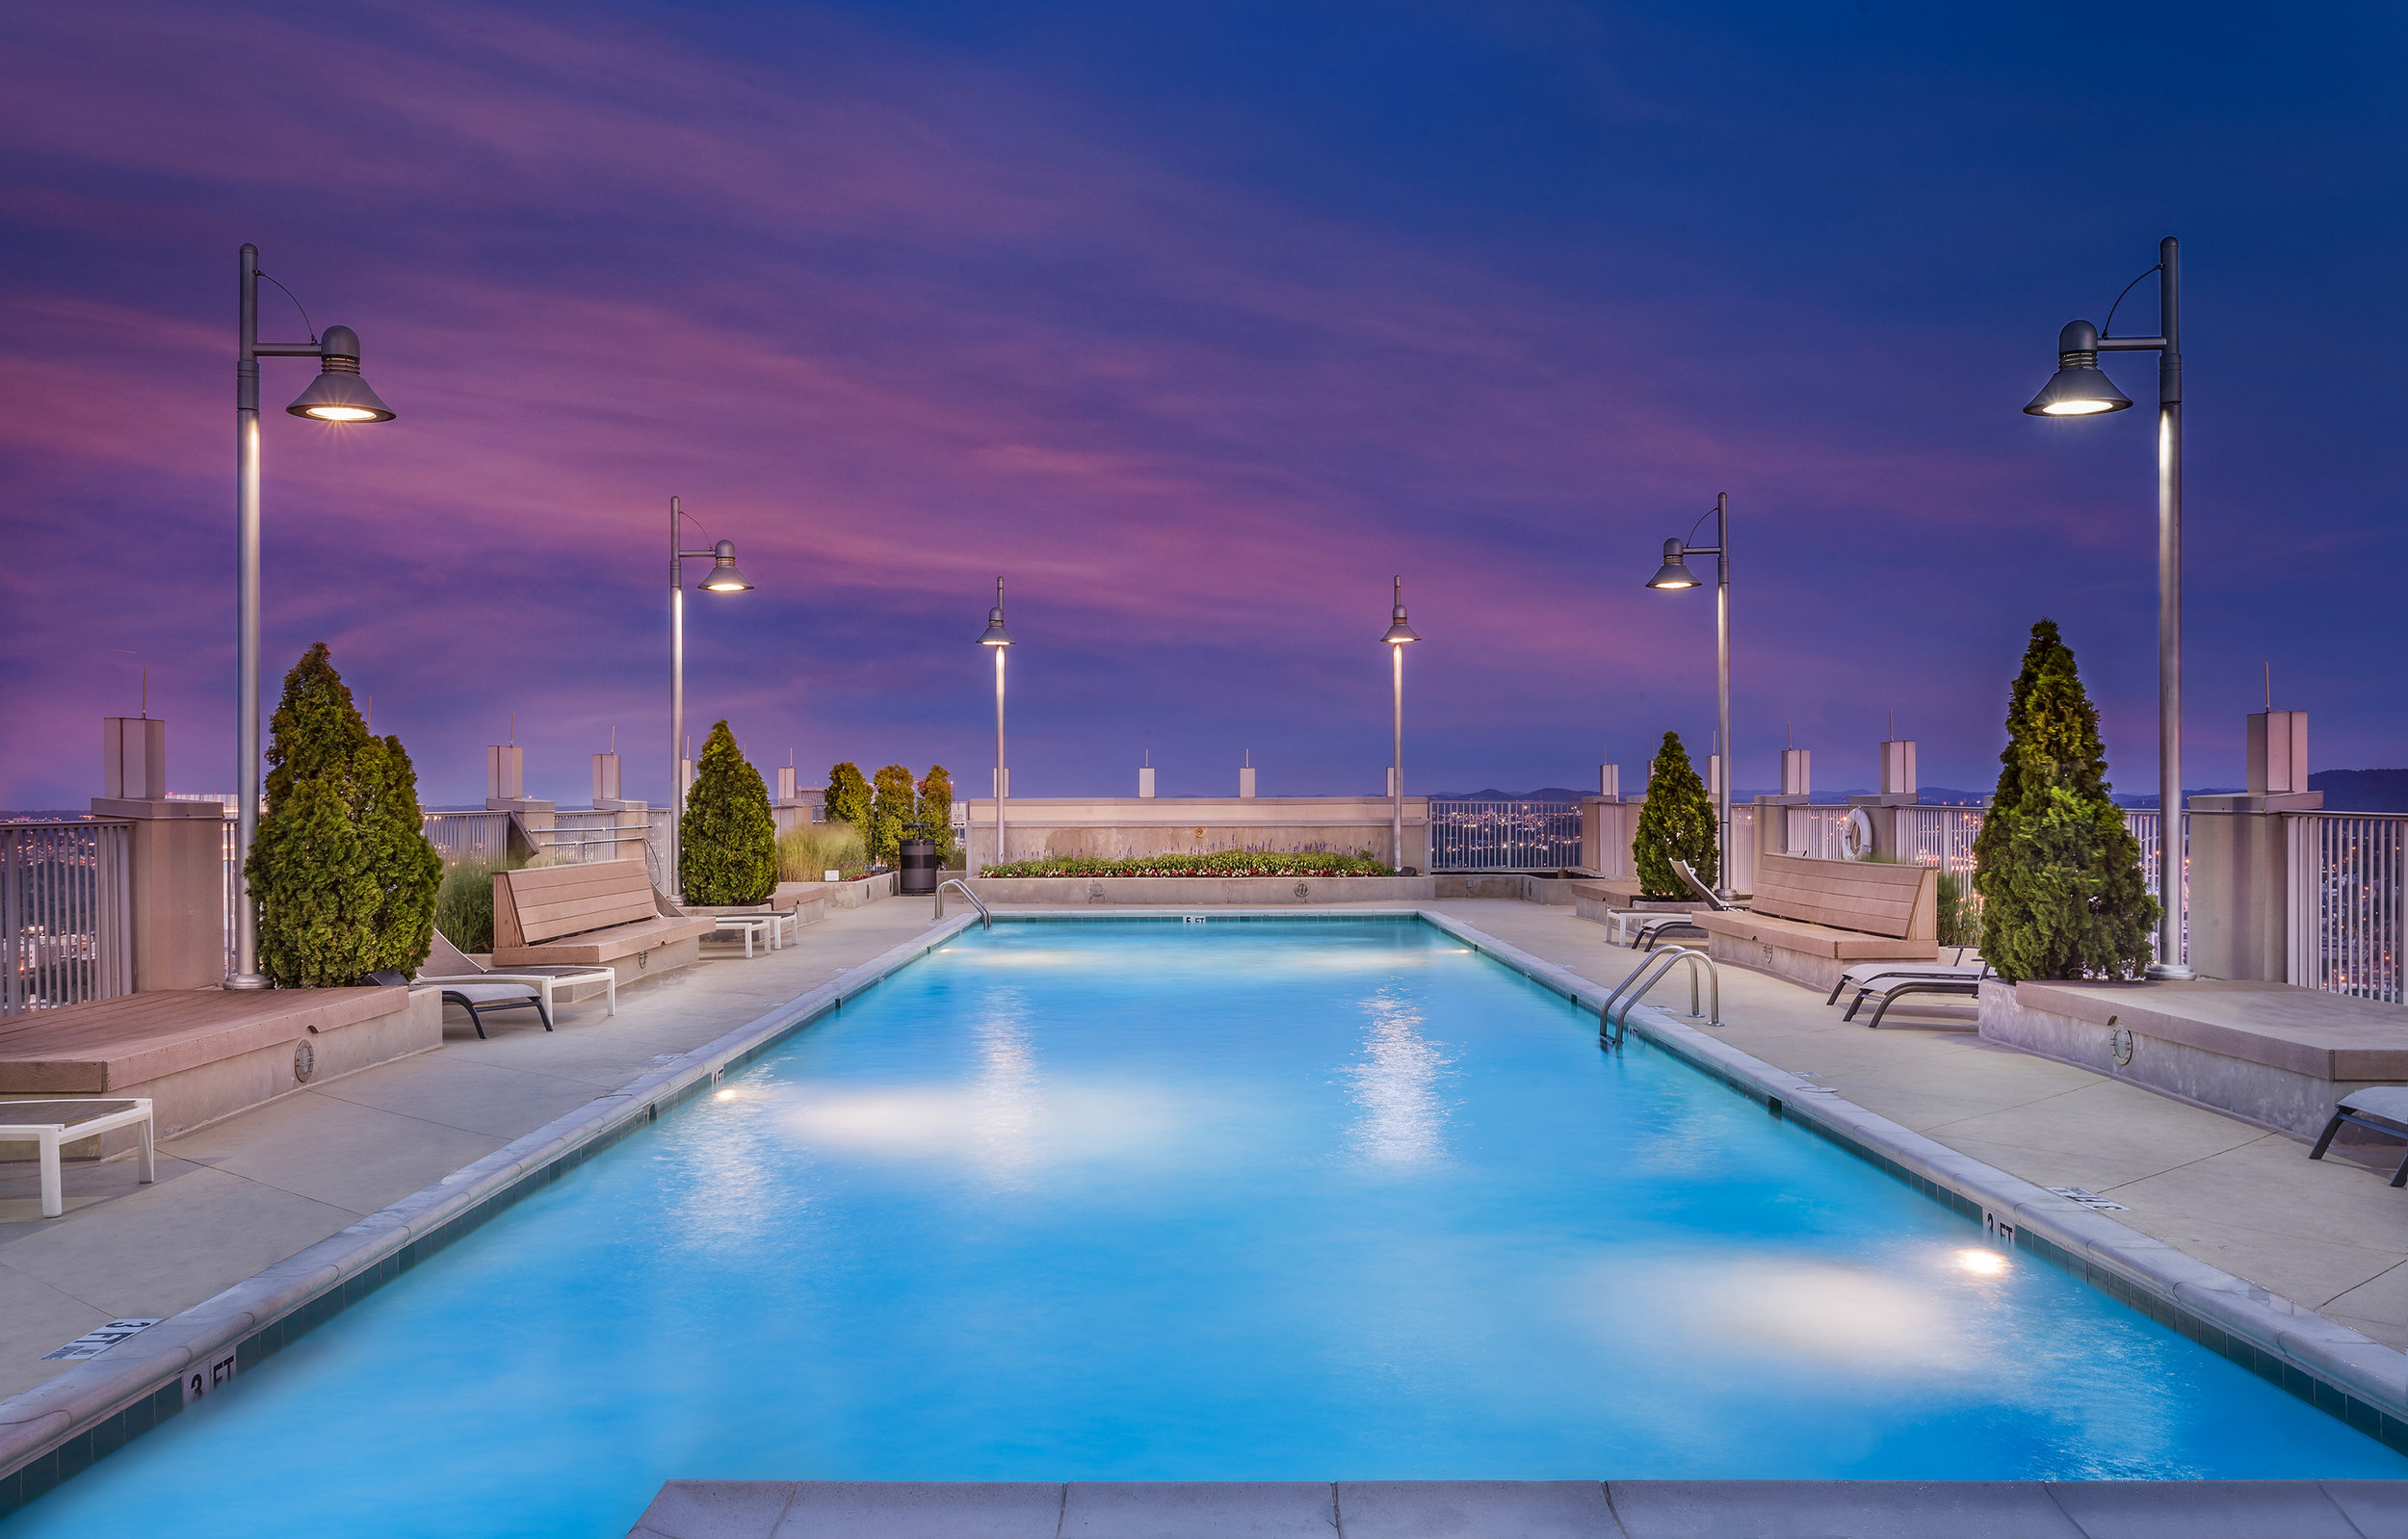  The Viridian Rooftop pool at sunset in Nashville, TN by 161 Photography 